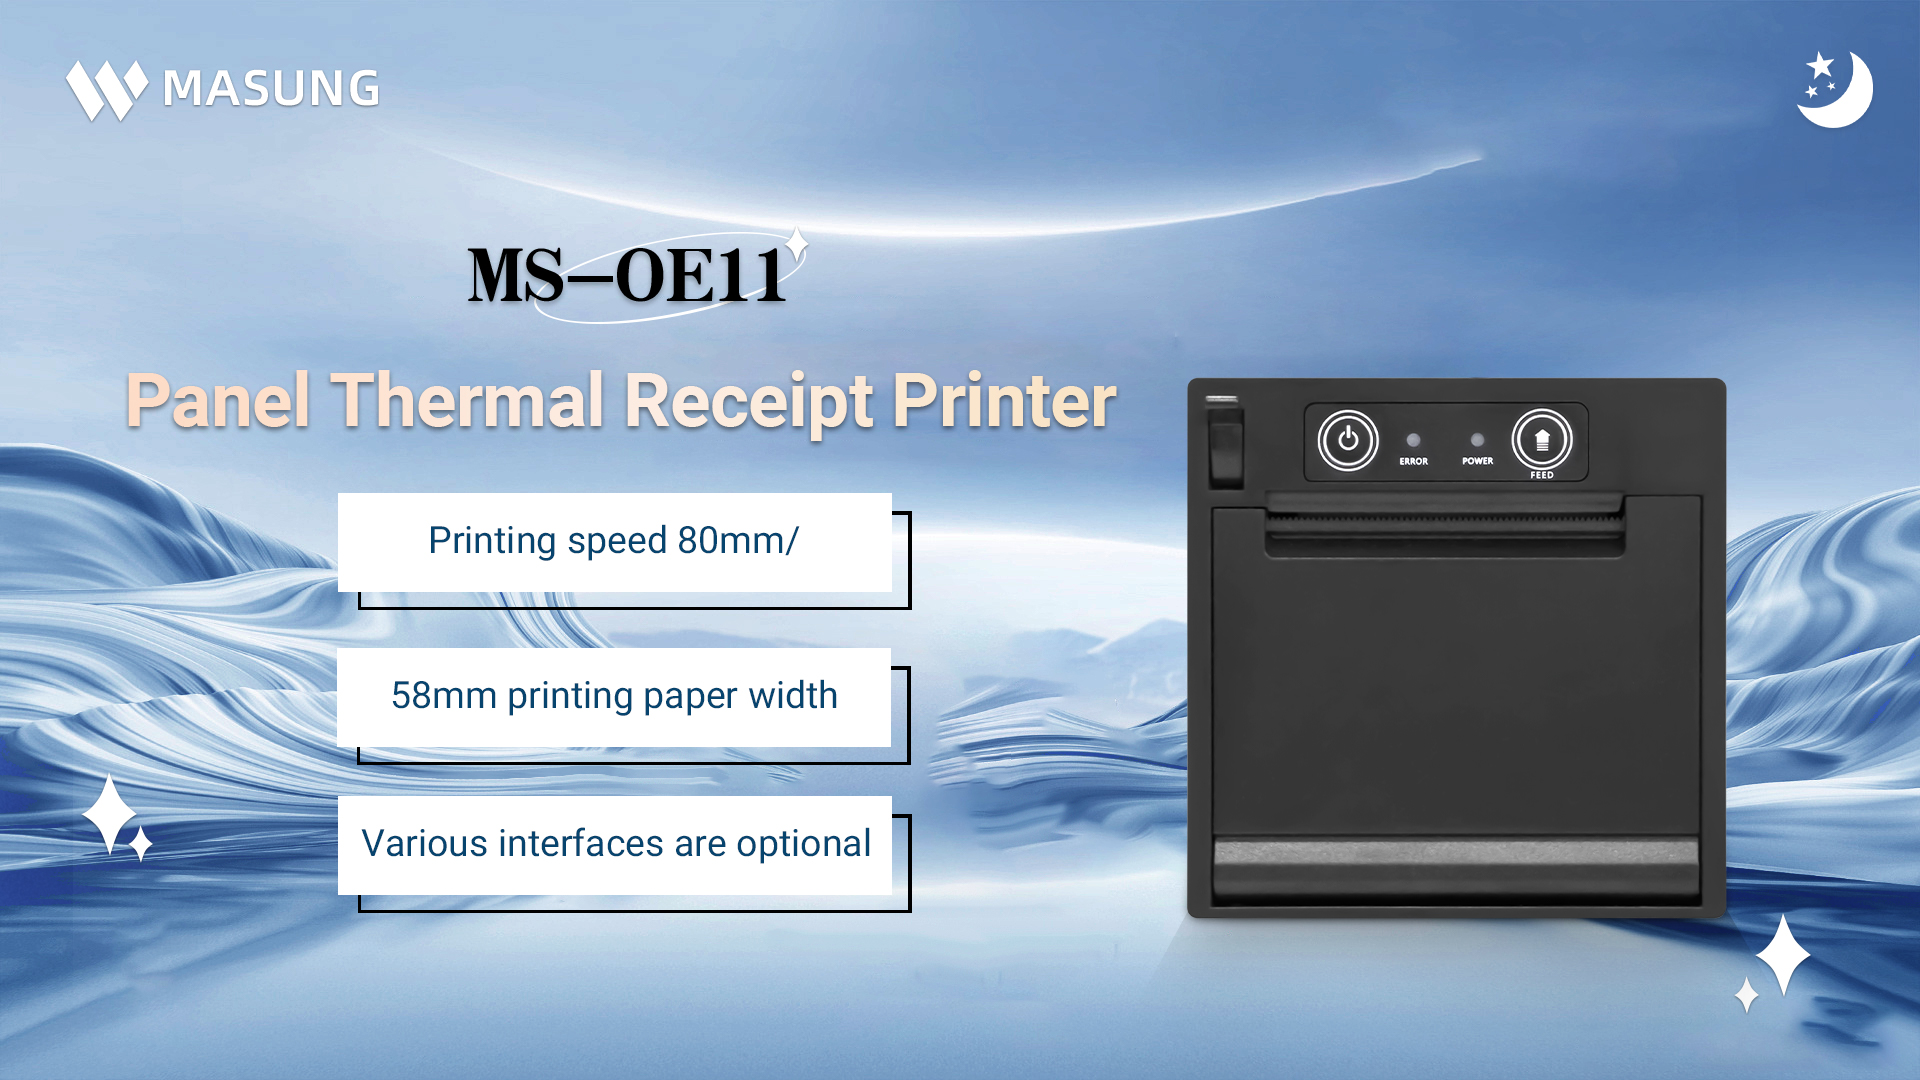 MASUNG Printer MS-OE11 Provides Solution for Self-Deposit Facilities